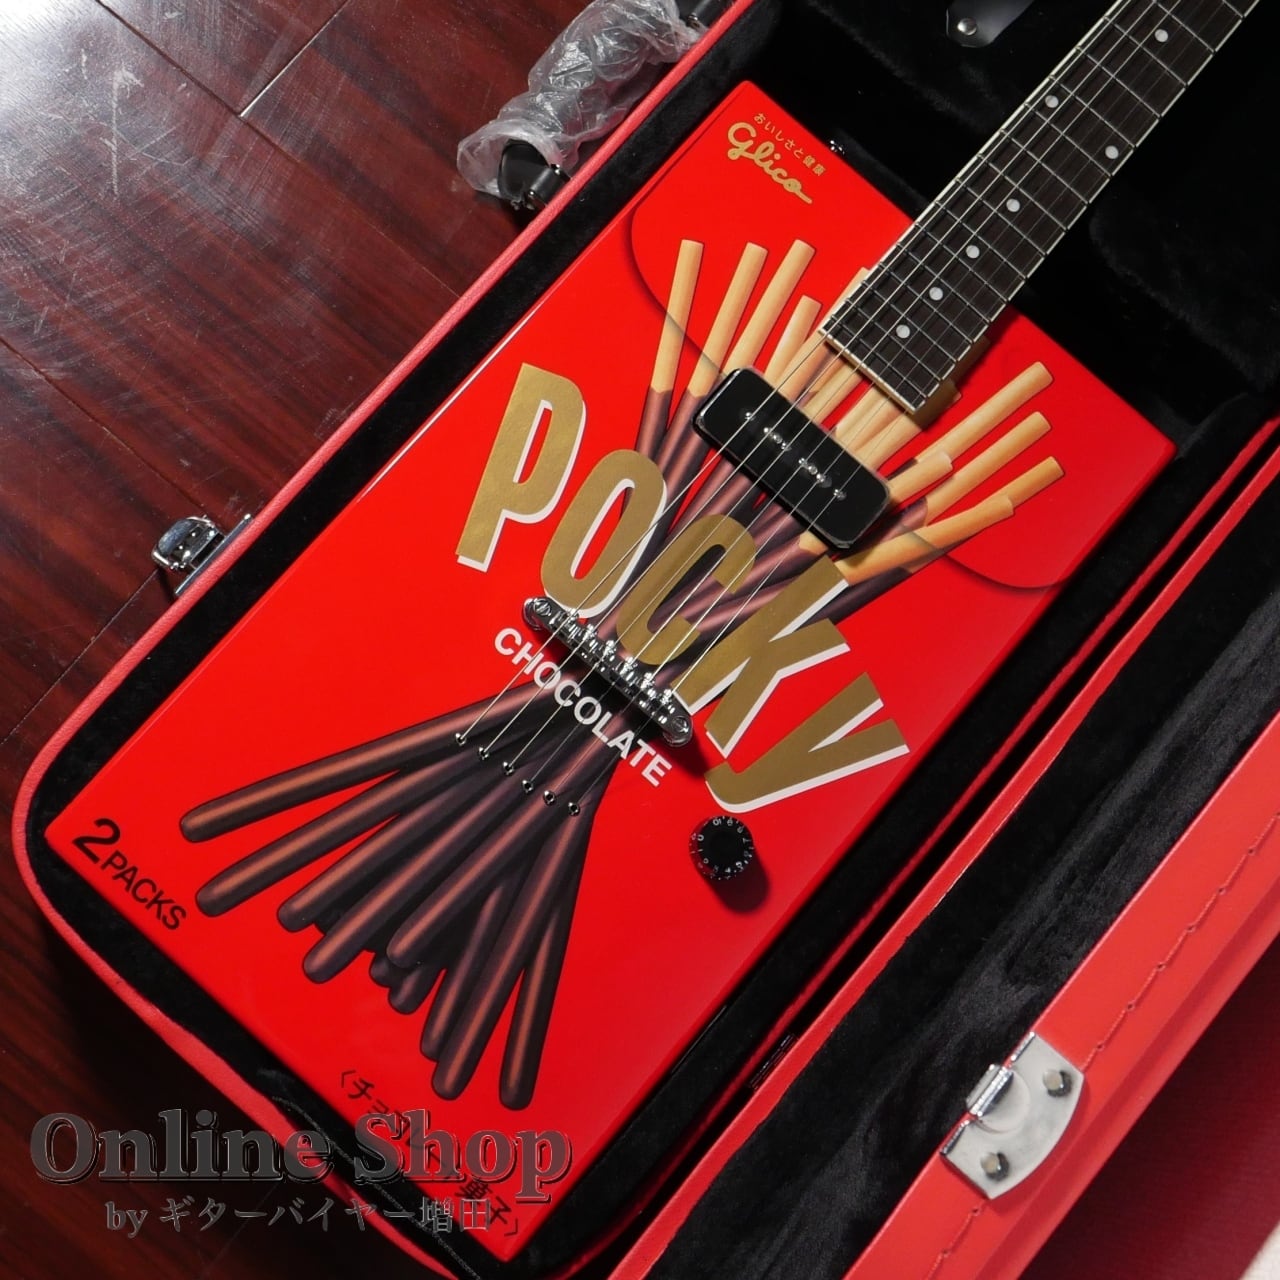 USED 2010s ポッキーギター Pocky Red | Online Shop by ギター 